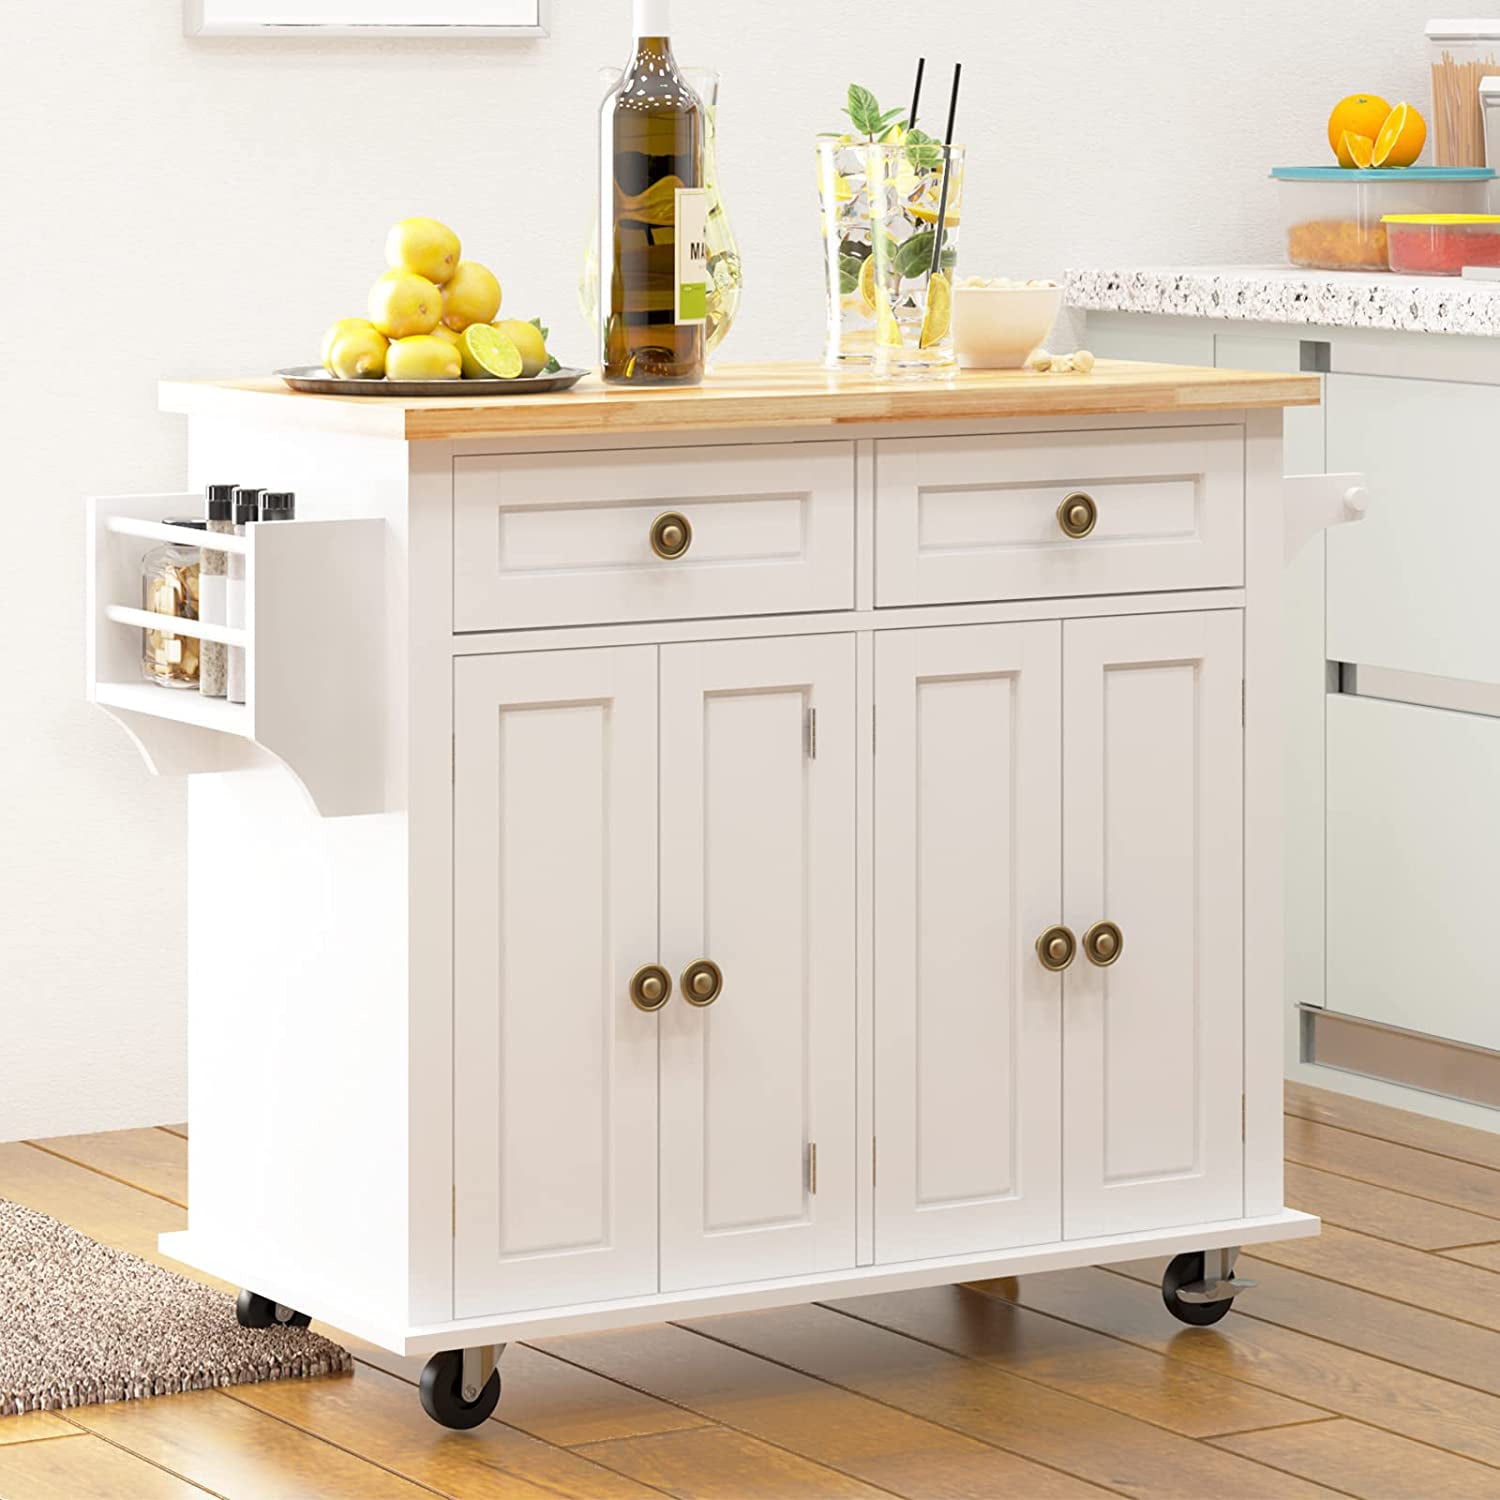 Soges Kitchen Island Trolley Cart Brown Wood Top Rolling Storage Cabinet White